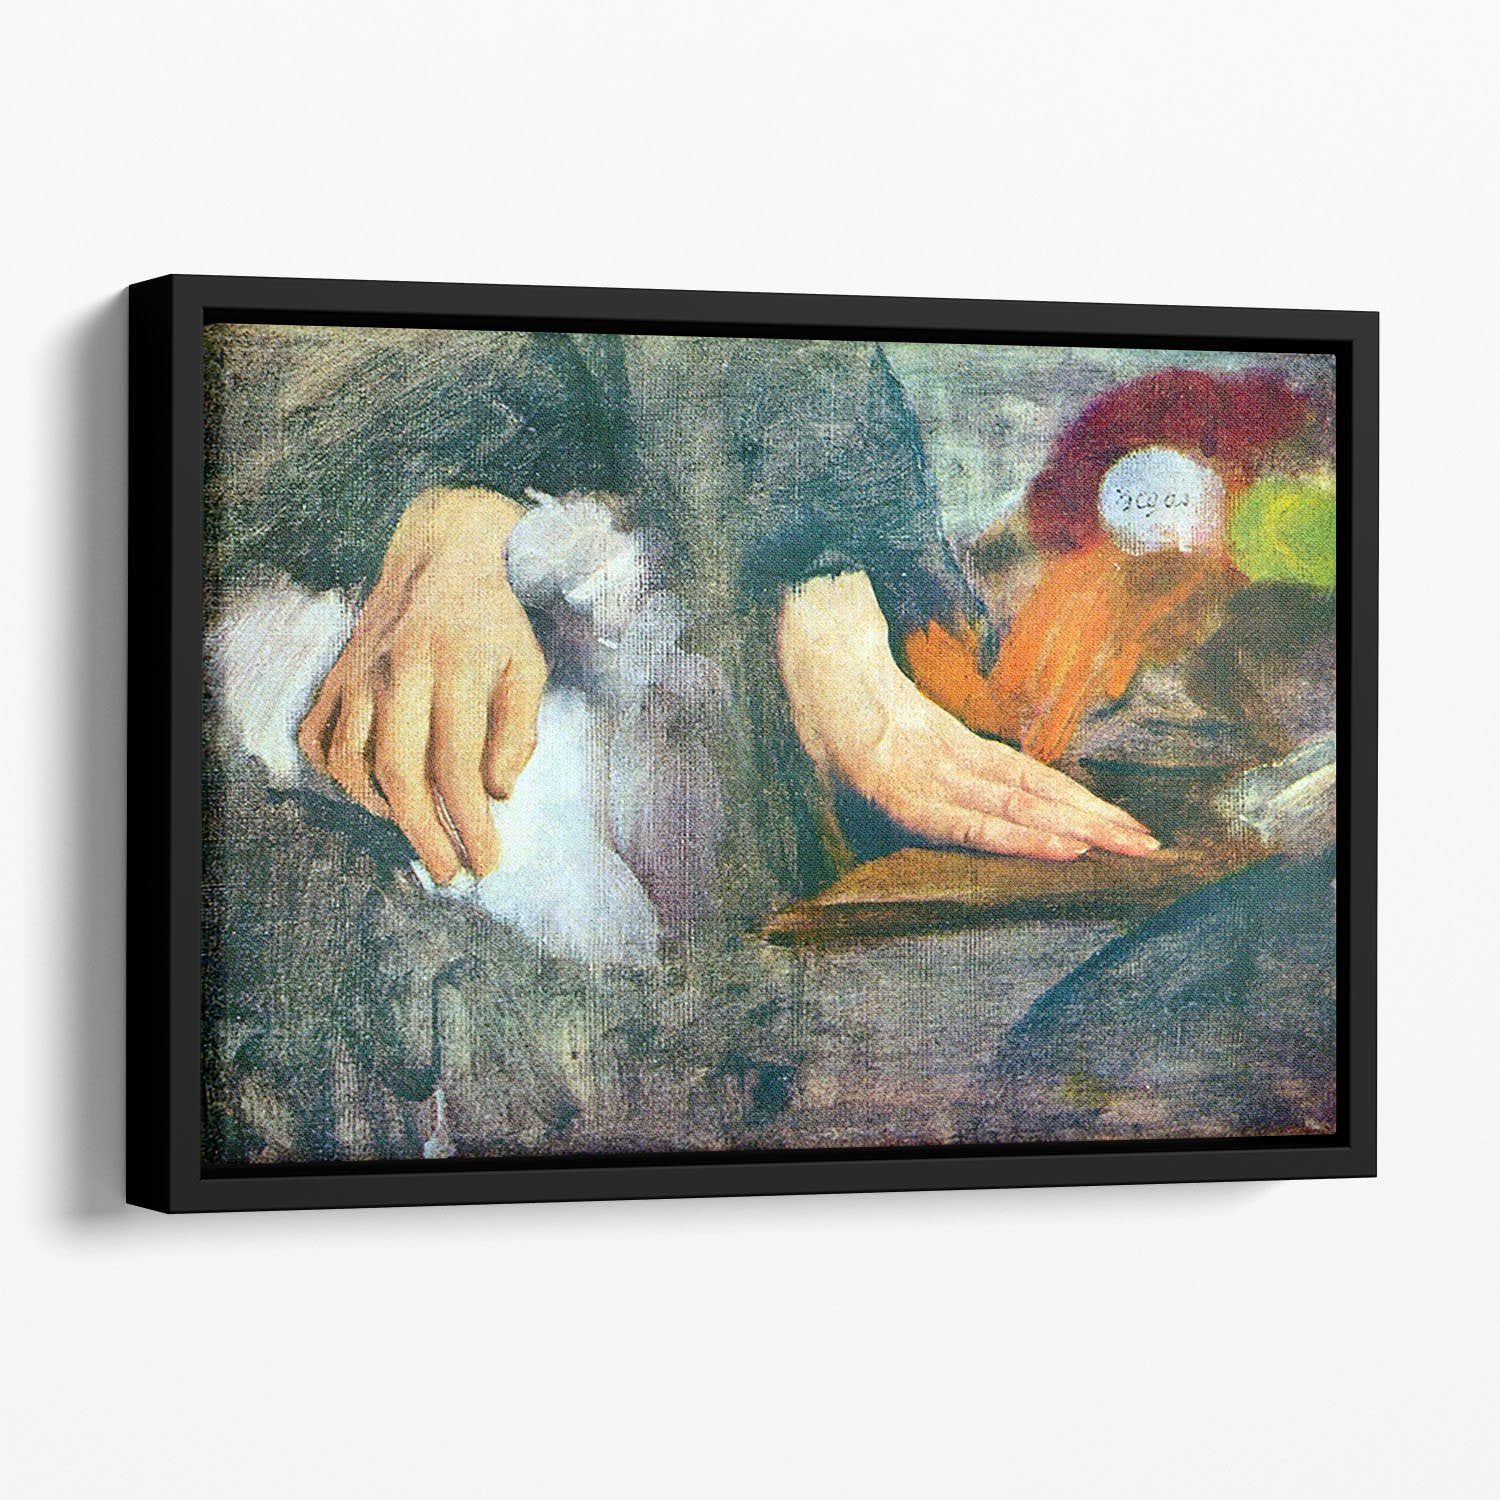 Hand Study by Degas Floating Framed Canvas